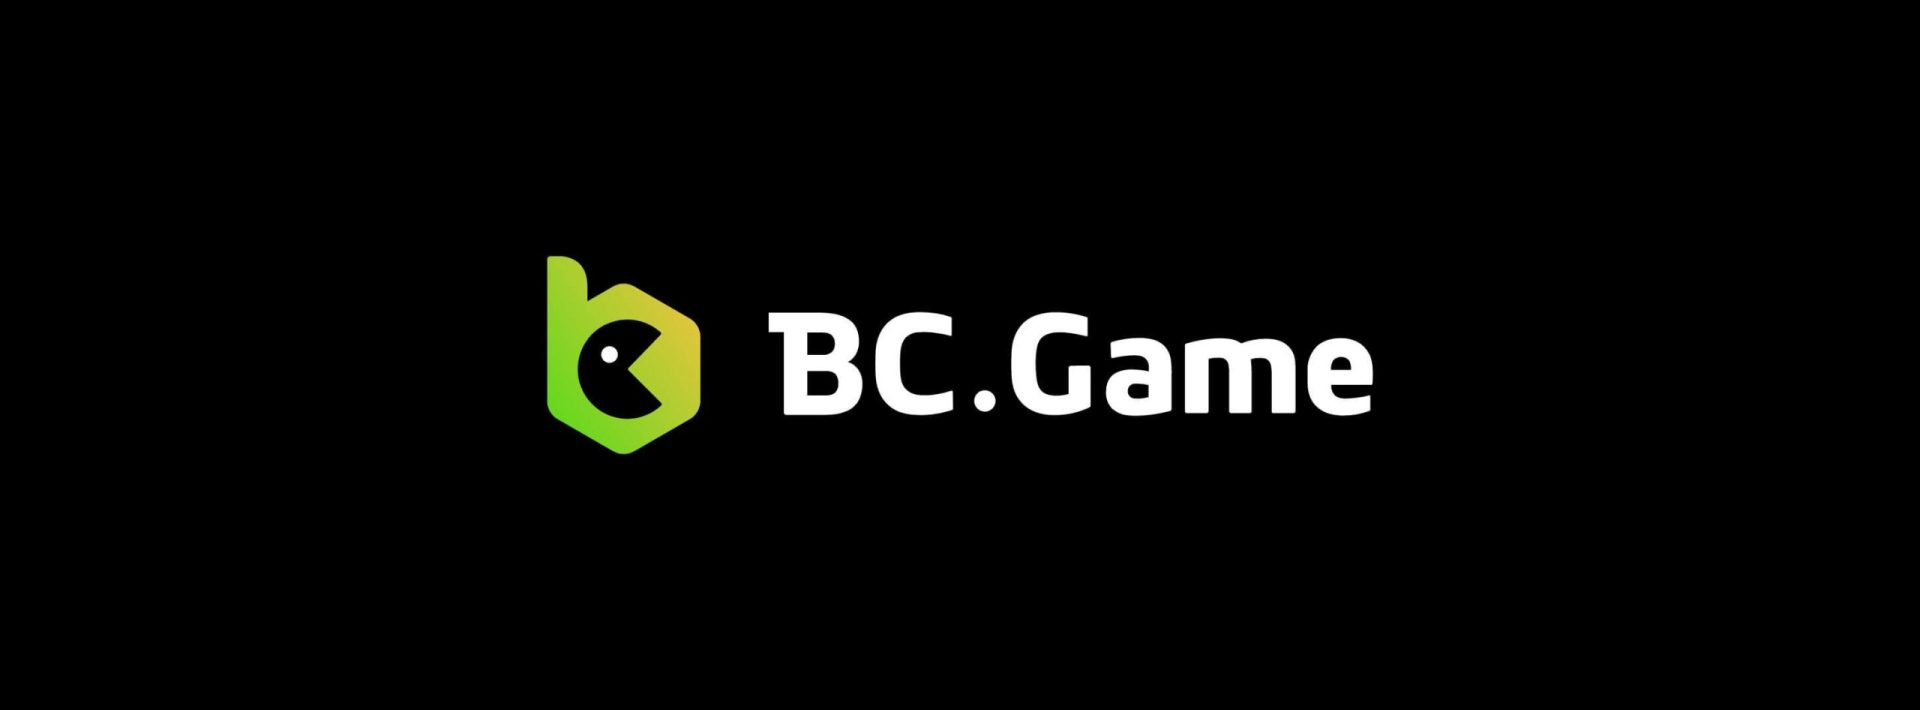 BC.Game named Crypto Casino Of The Year